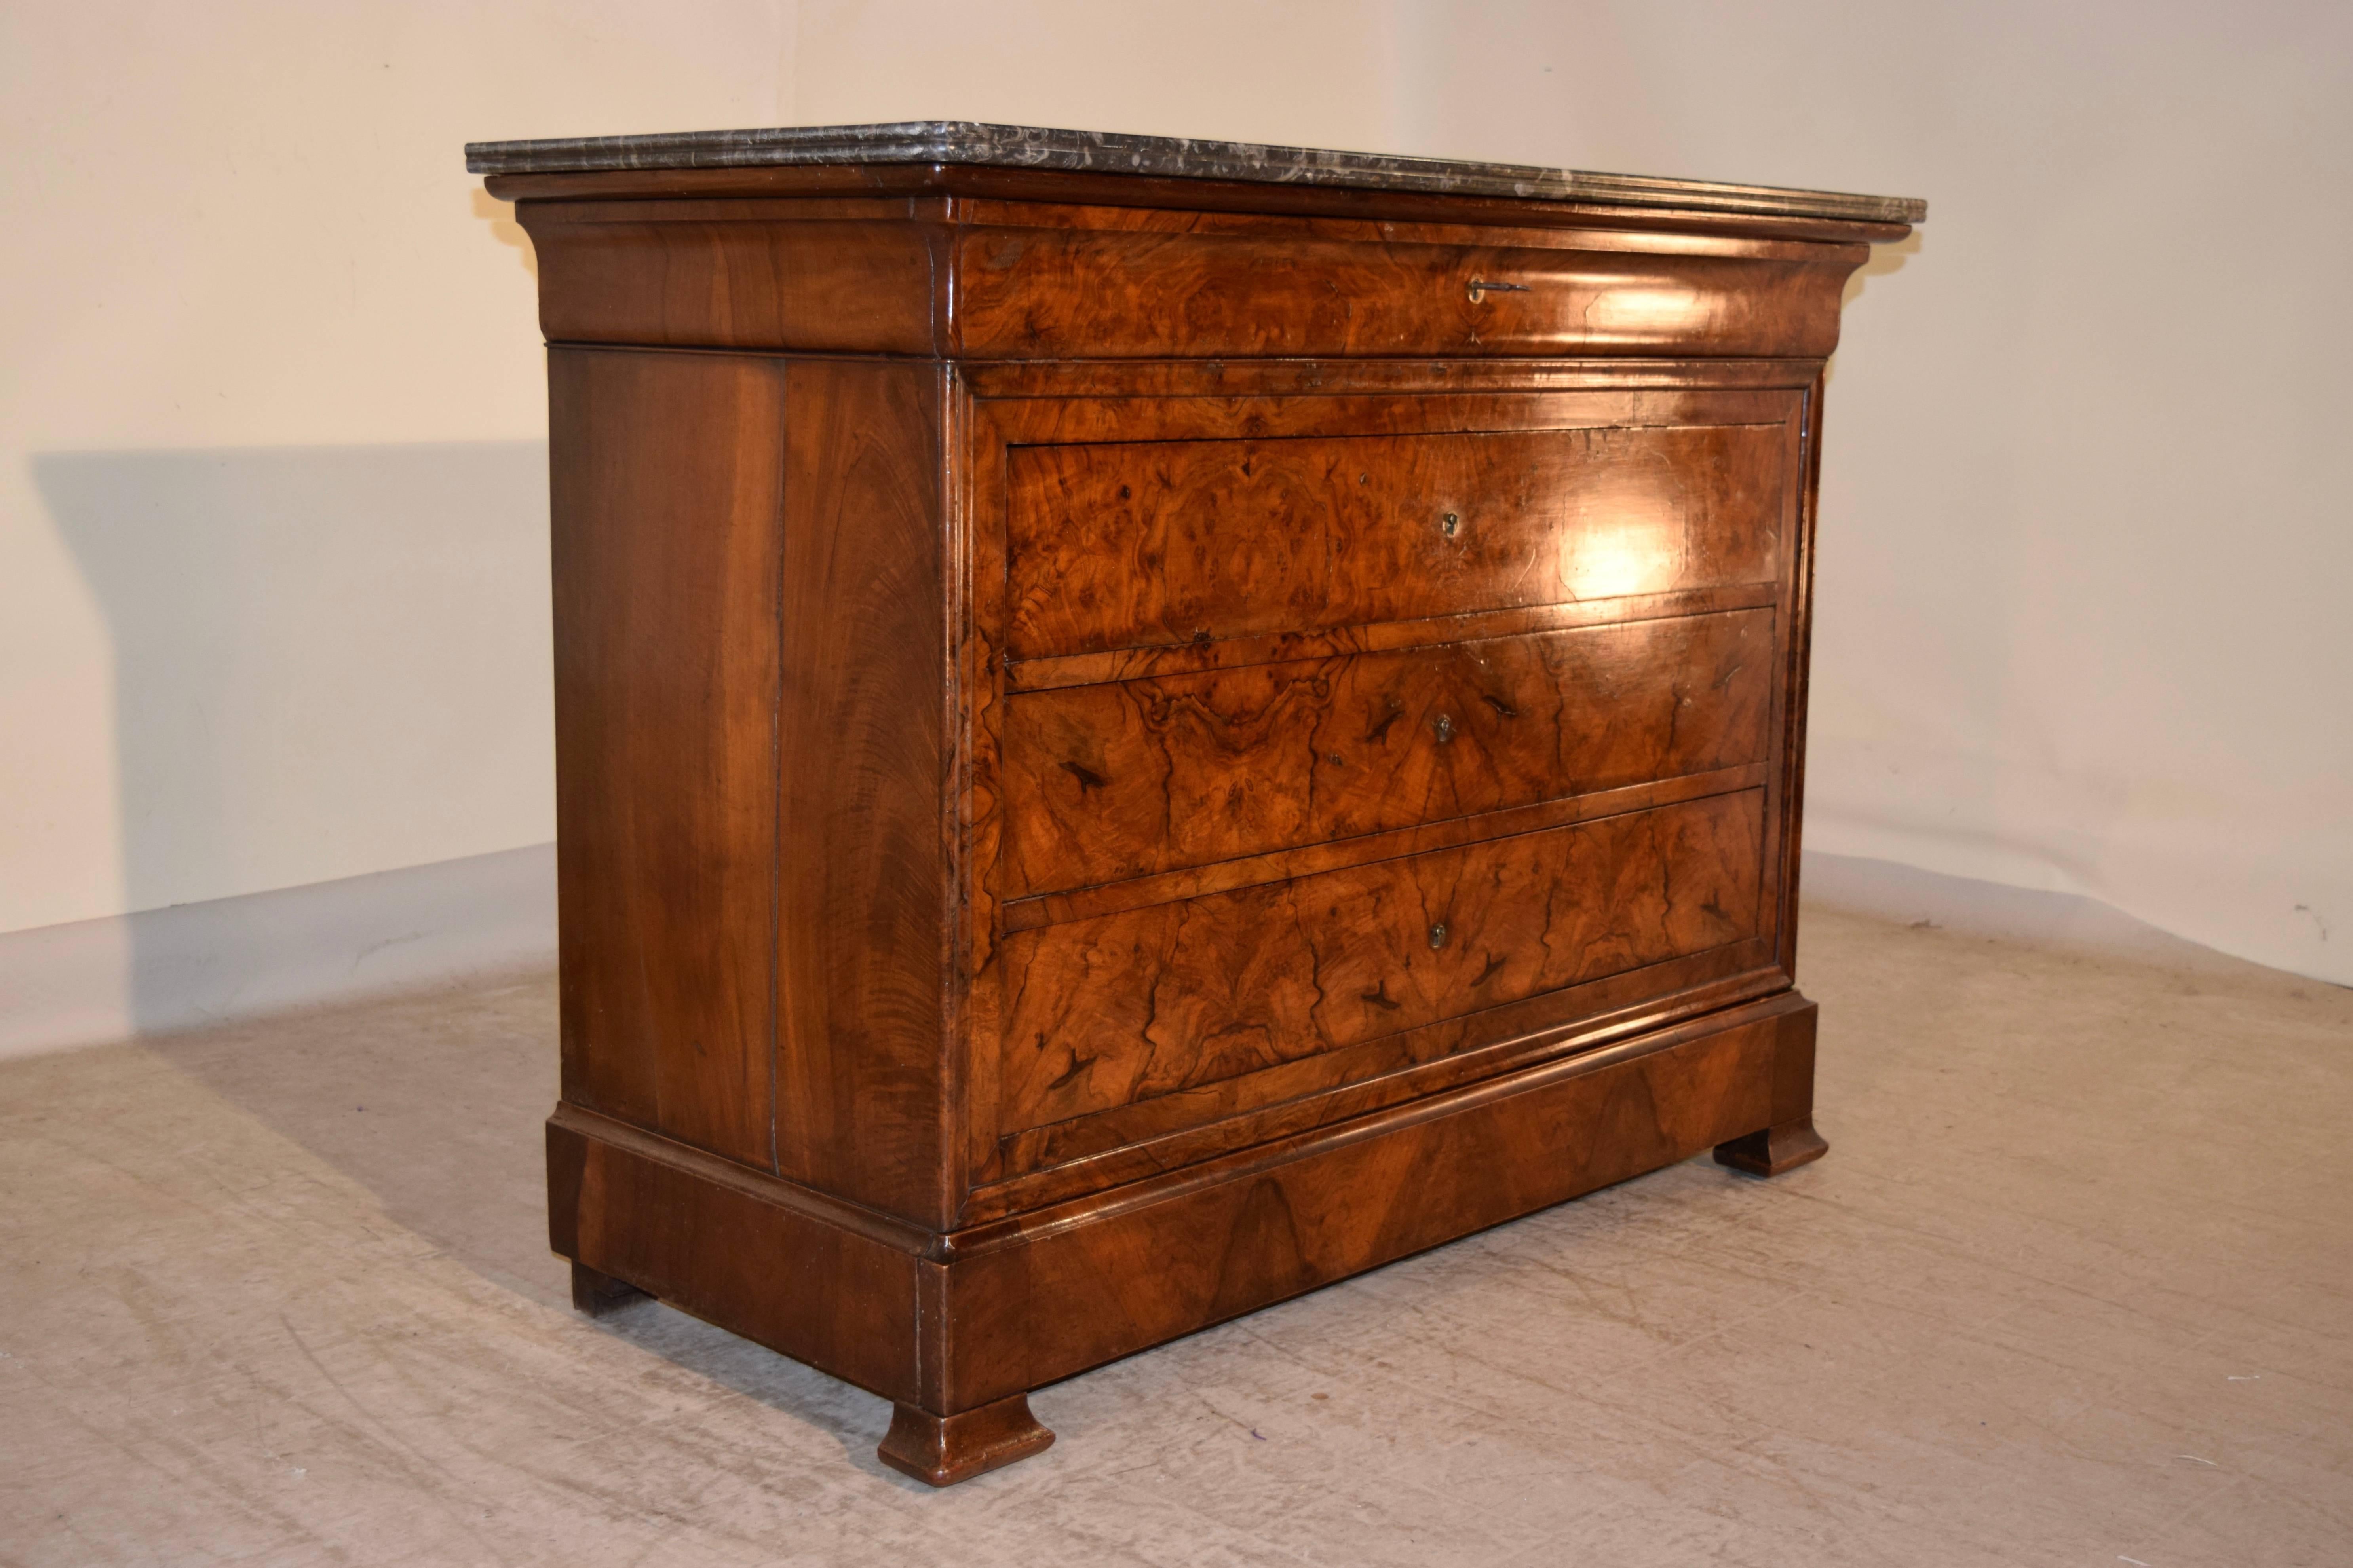 19th century Louis Philippe commode with a removable marble top, following down to a drawer, which is concealed in the molded top and three other drawers below. The piece is made of burl walnut on the front and simple walnut on the sides. Raised on